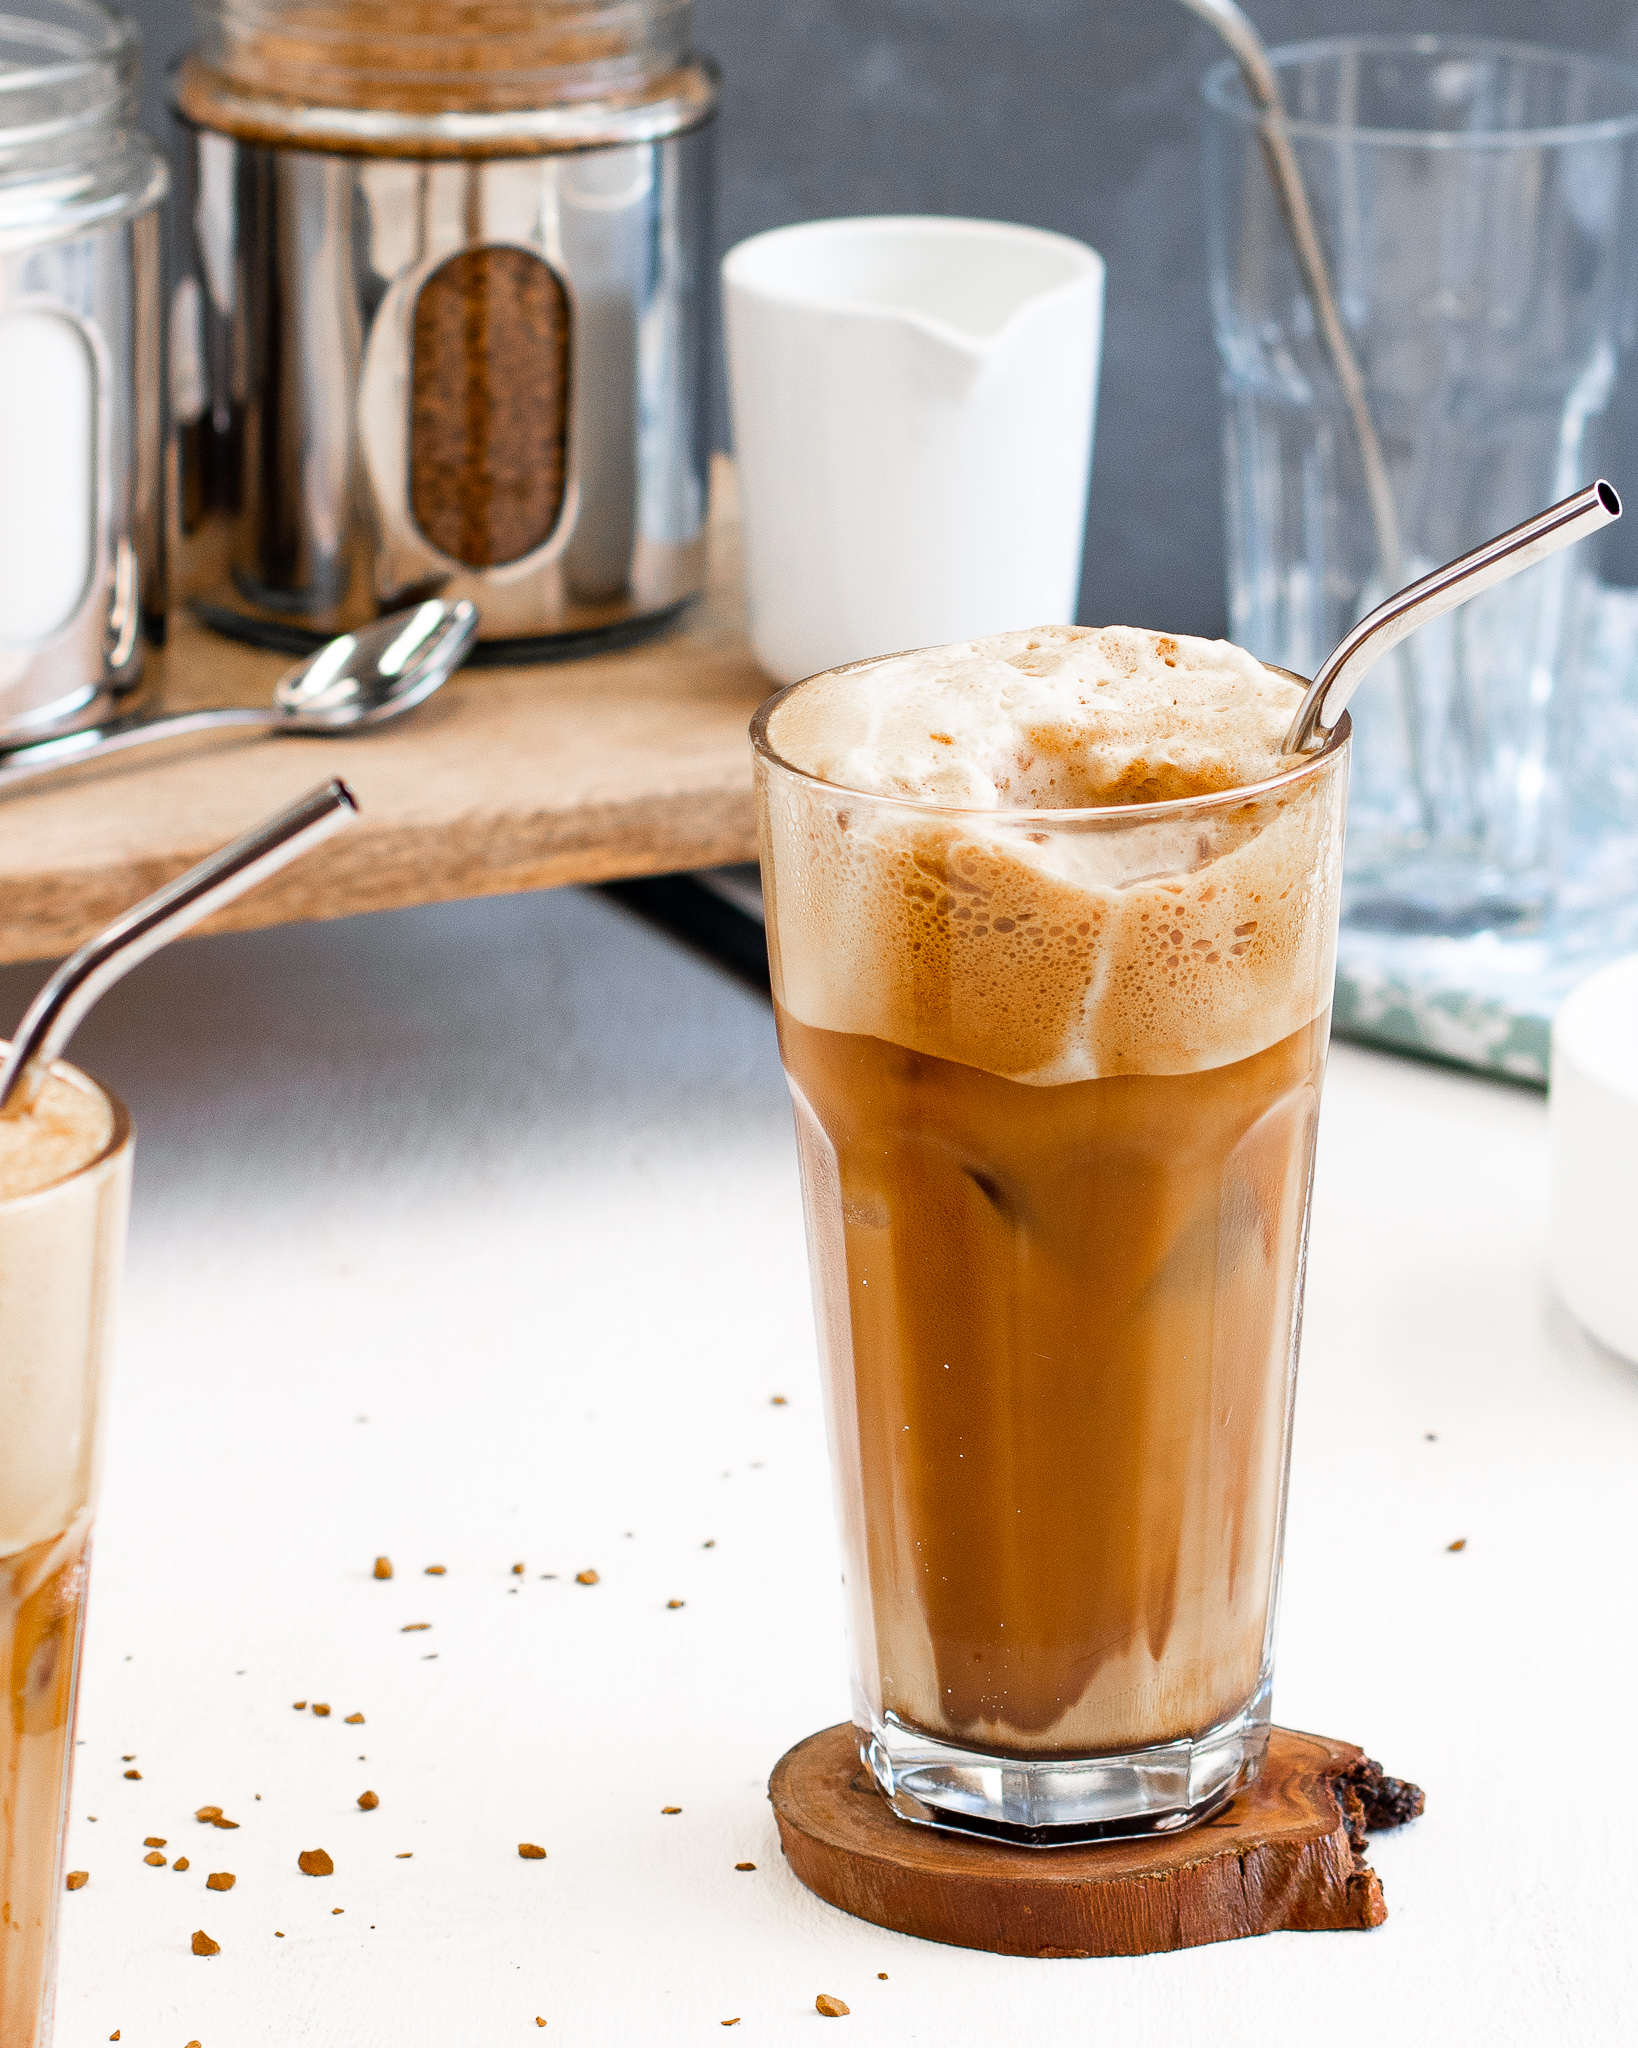 How to Make Cold Coffee, Iced Nescafe Frappe